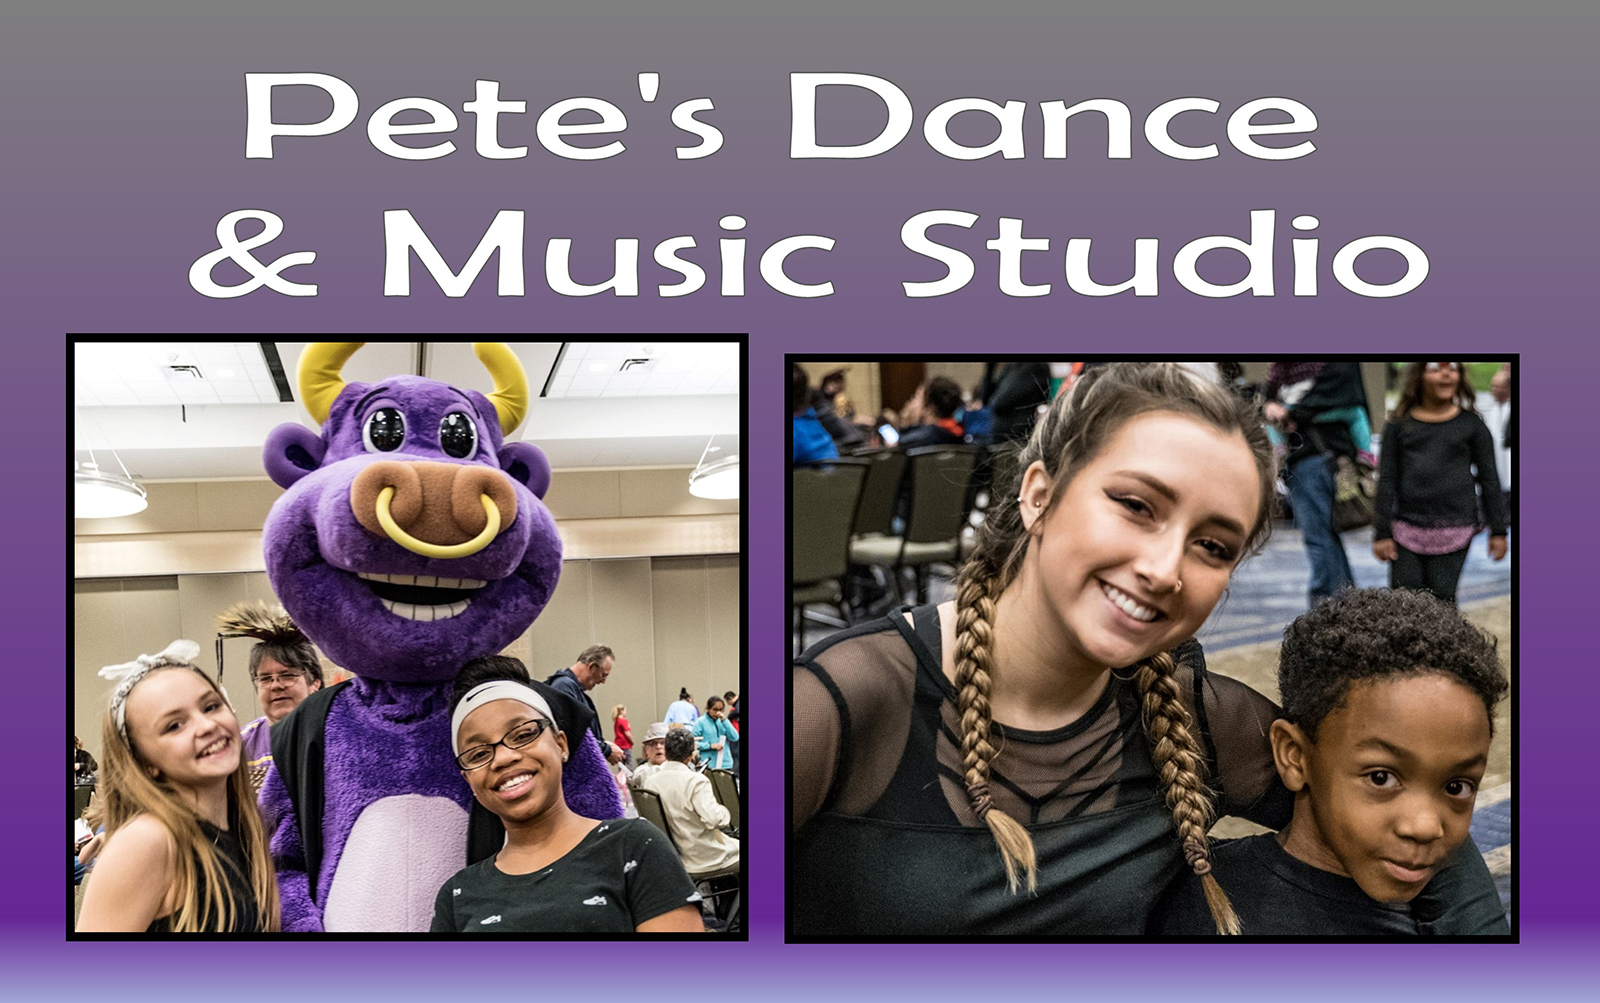 Photo of Pete the Purple Bull and several young dancers with text that says Pete's Dance and Music Studio